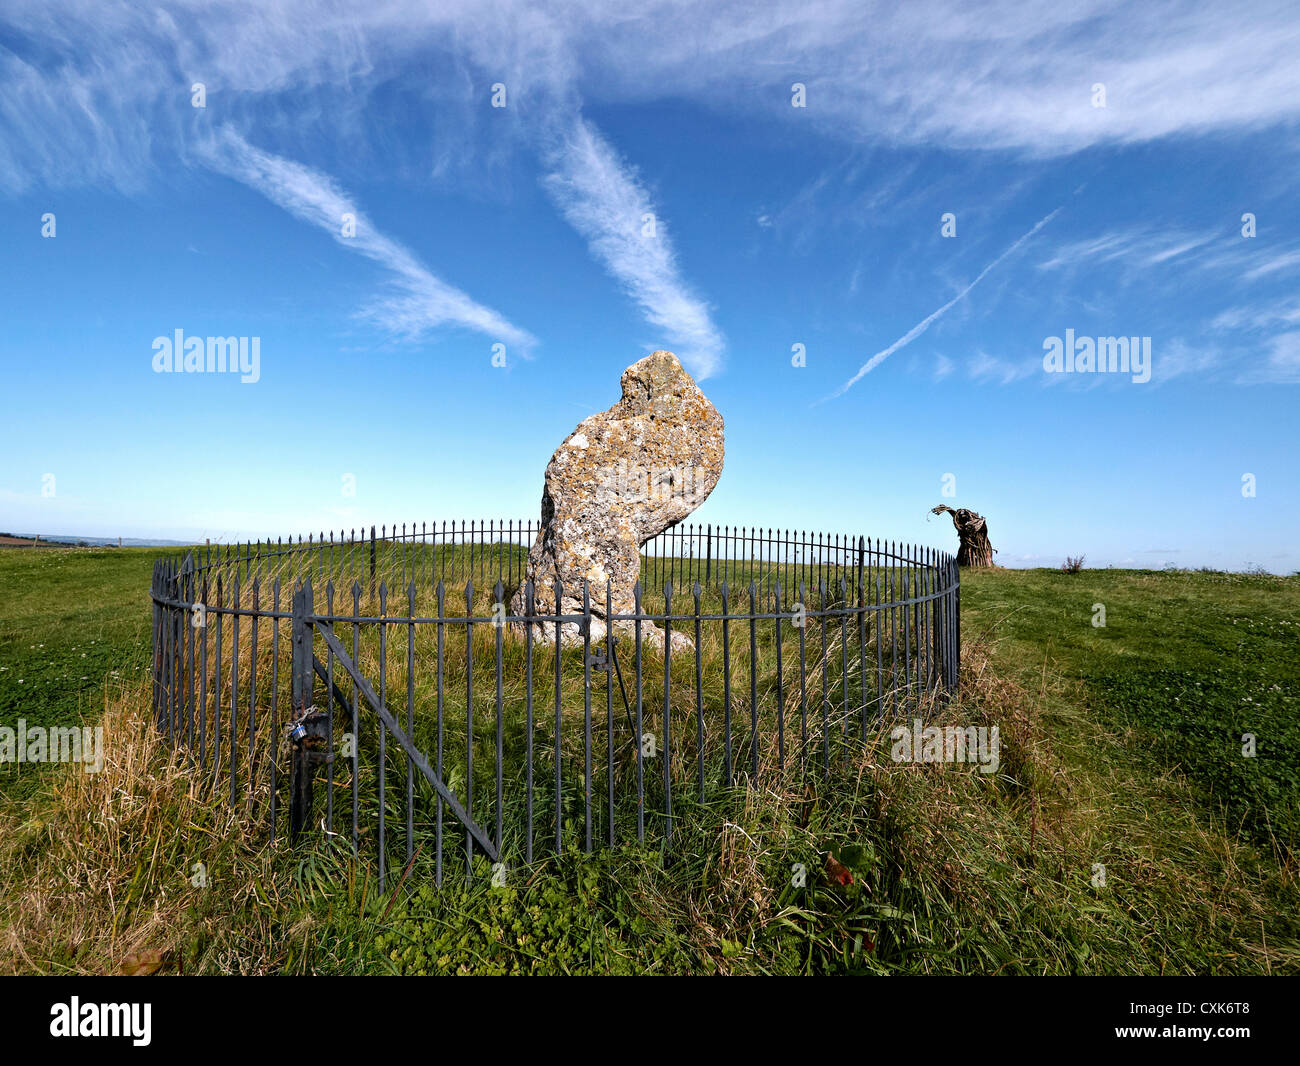 The King Stone at the historic site of the Rollright Stones Little Compton Gt. Rollright Oxfordshire England Stock Photo